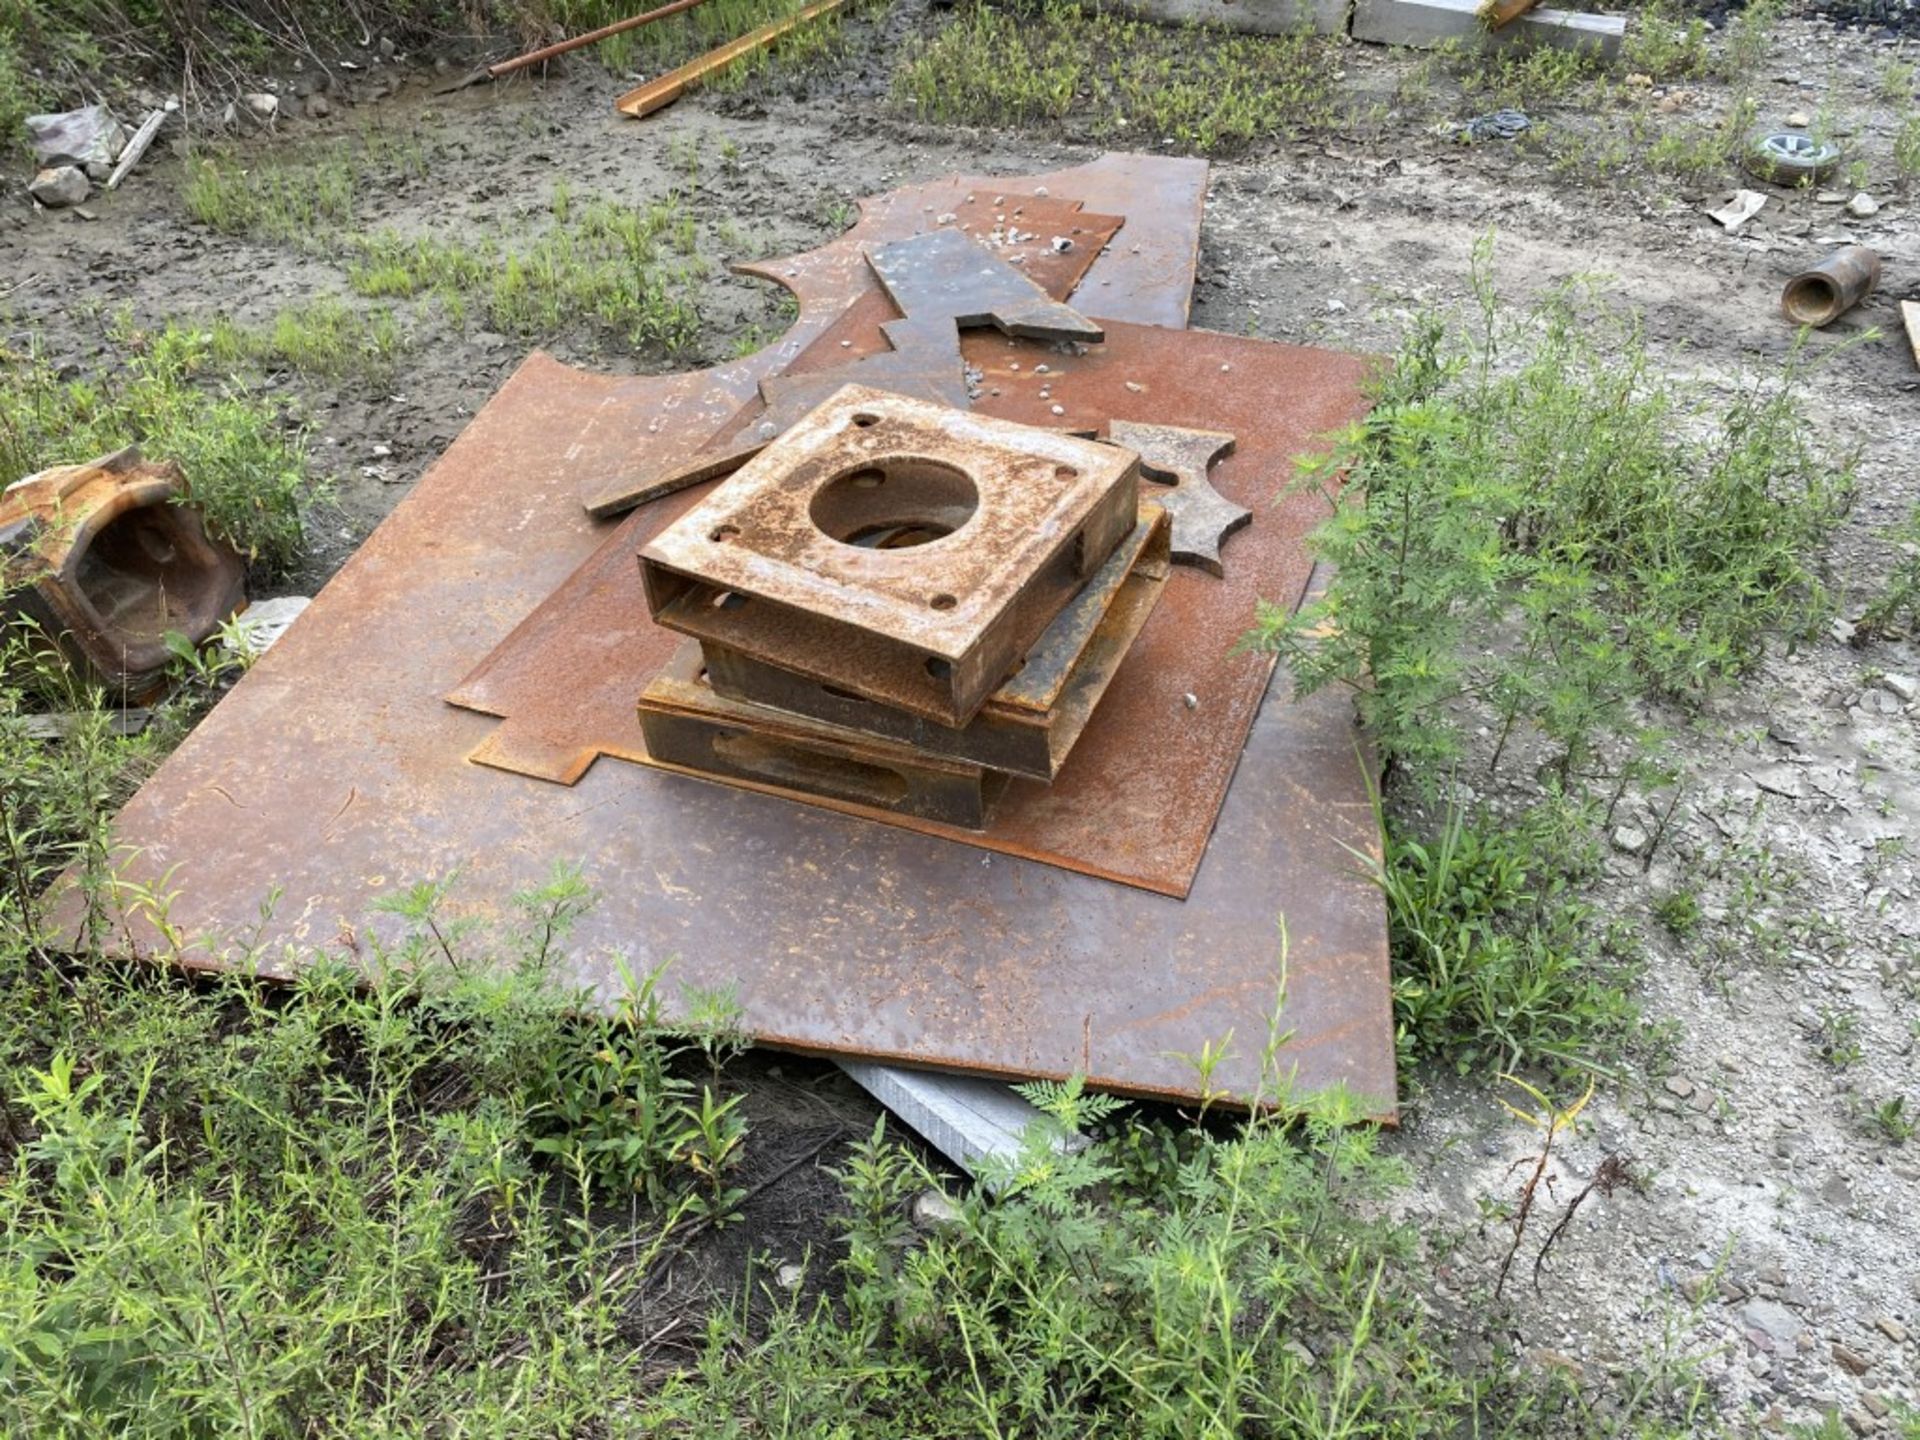 CATERPILLAR DOZER BLADE, 241.8'', S/N: 7GW00986, COMES WITH ASSORTED USED EQUIPMENT PARTS - Image 12 of 19